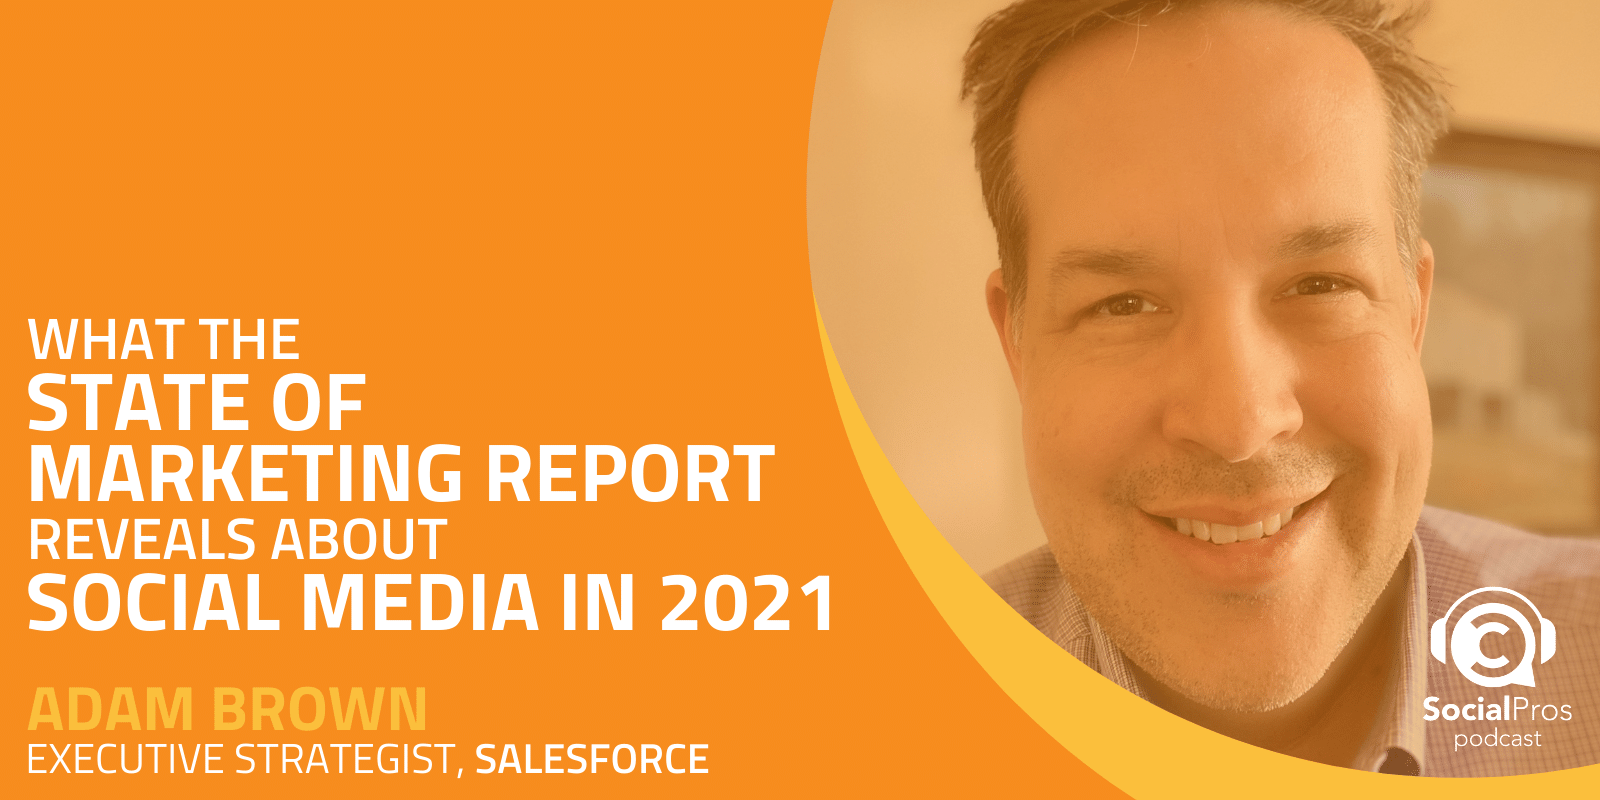 What the State of Marketing Report Reveals about Social Media in 2021